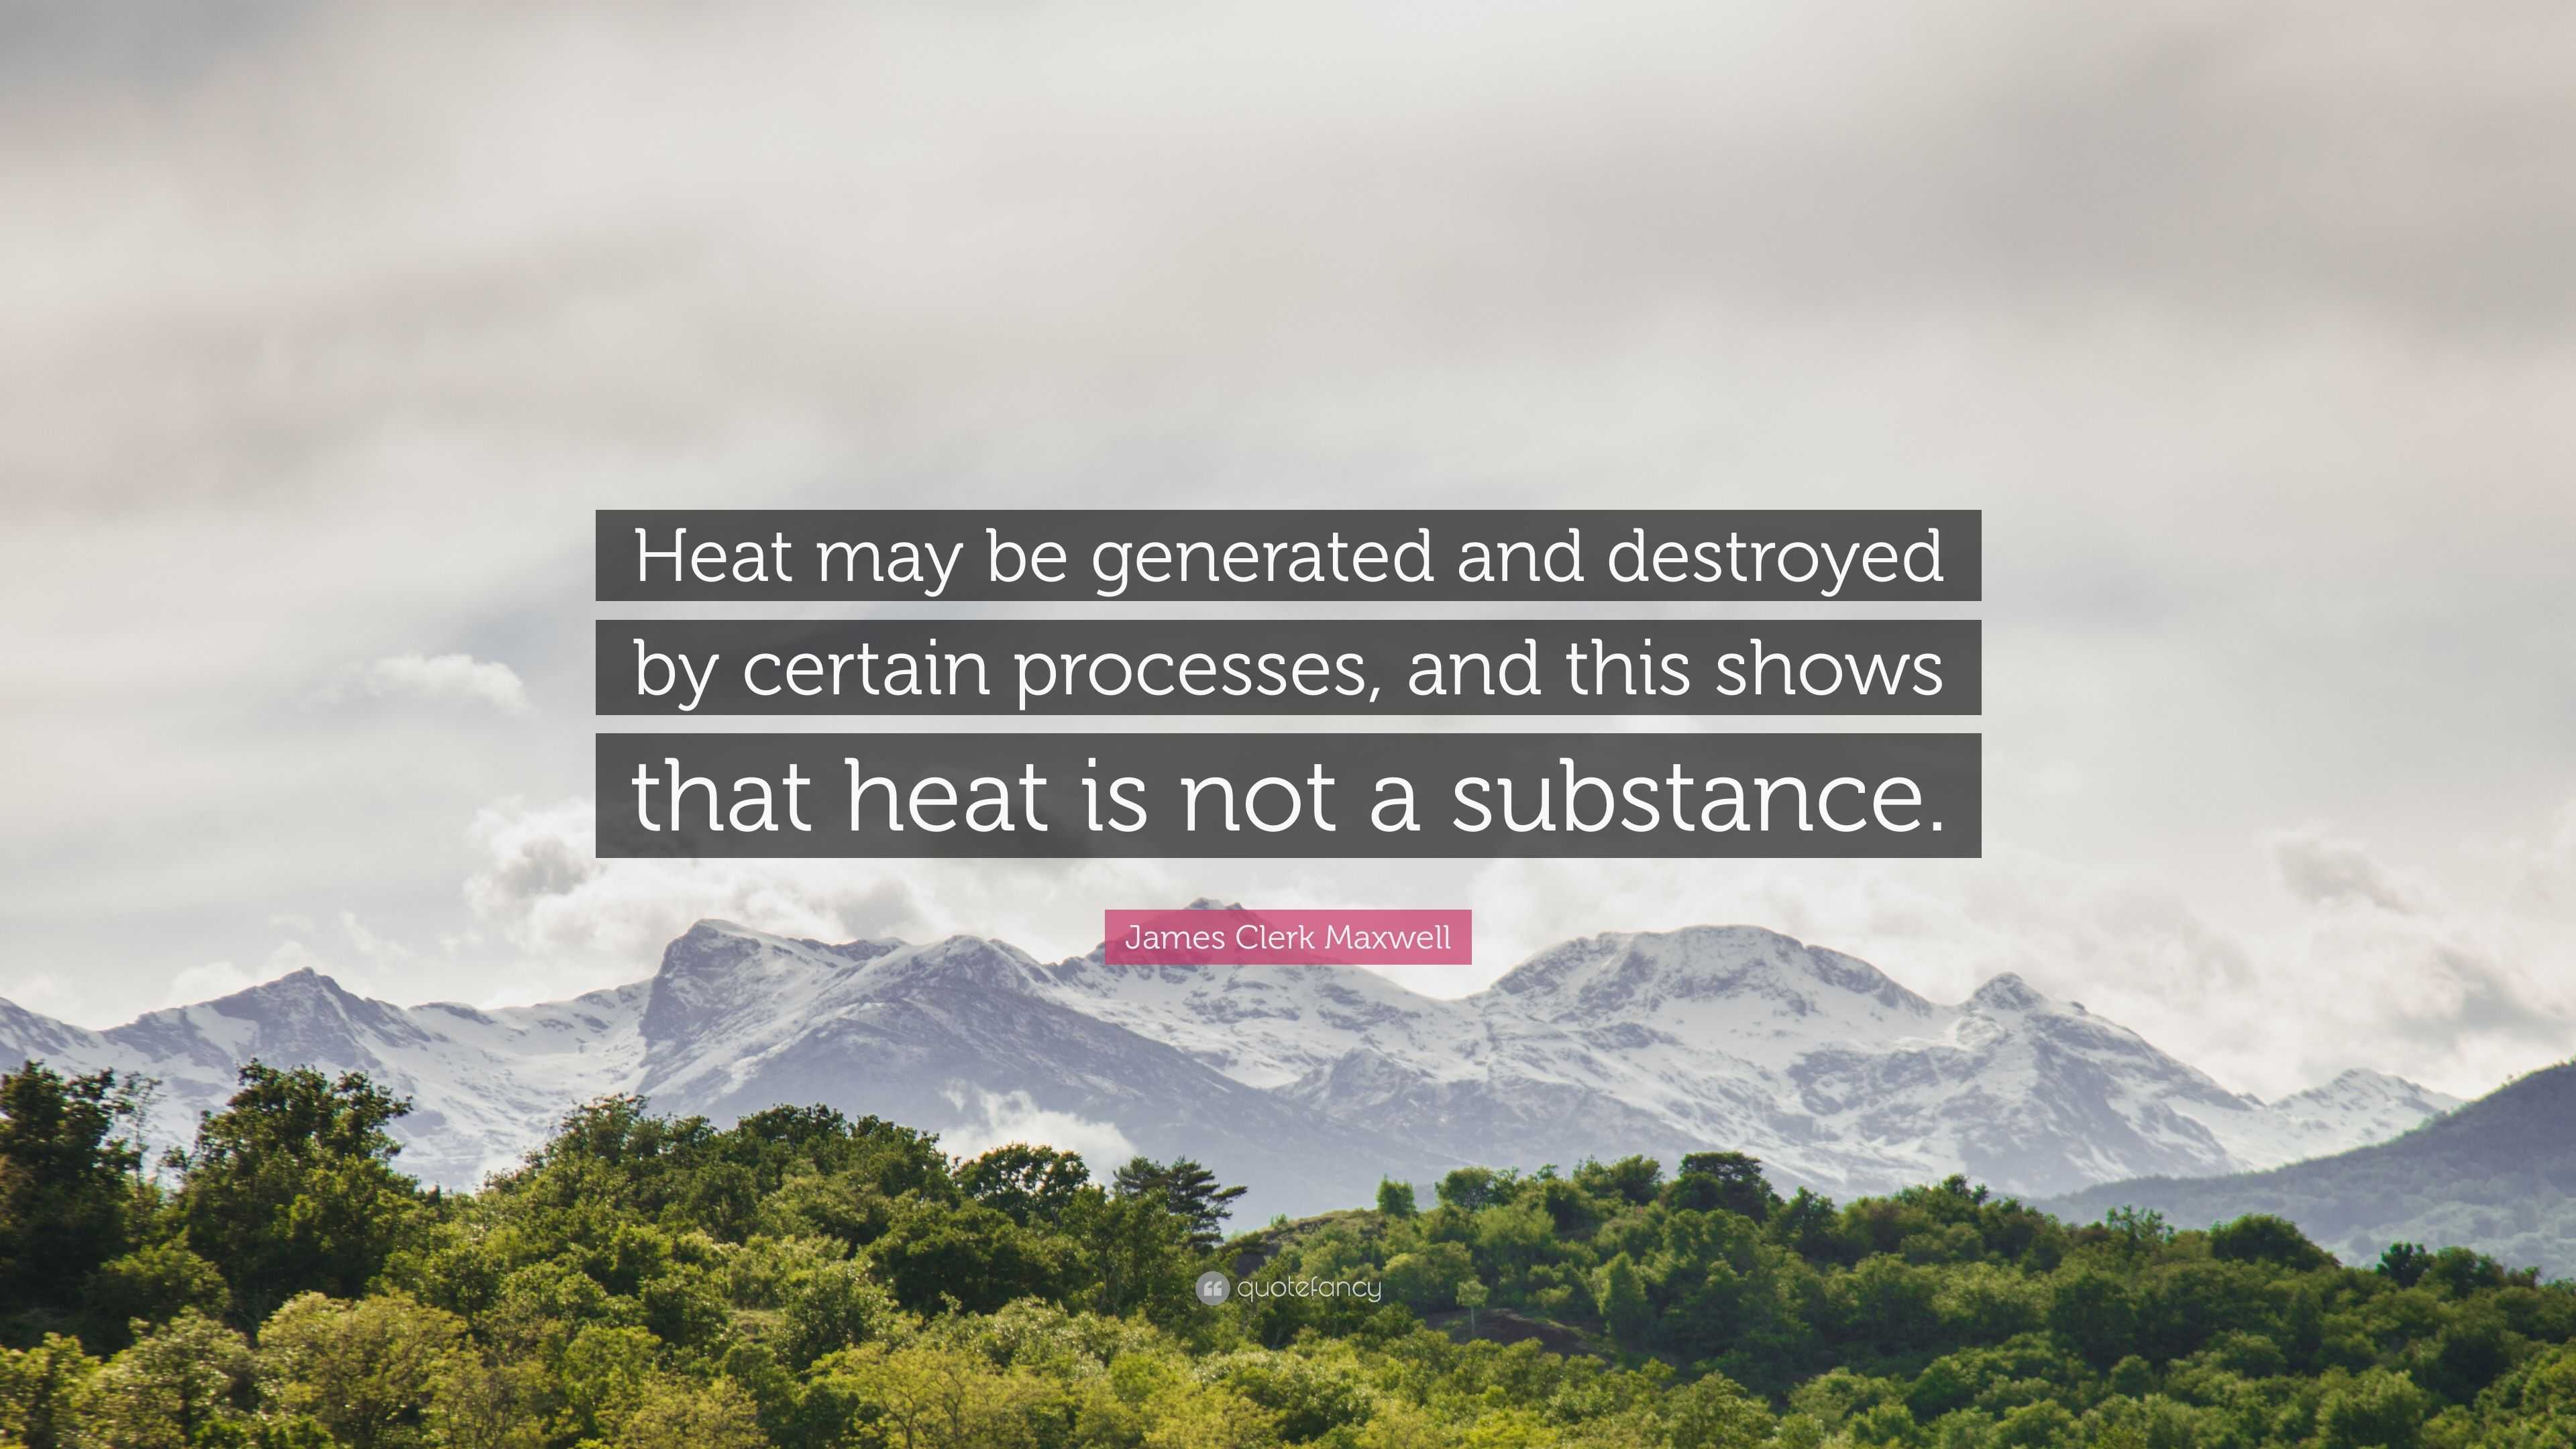 James Clerk Maxwell Quote: “Heat may be generated and destroyed by ...